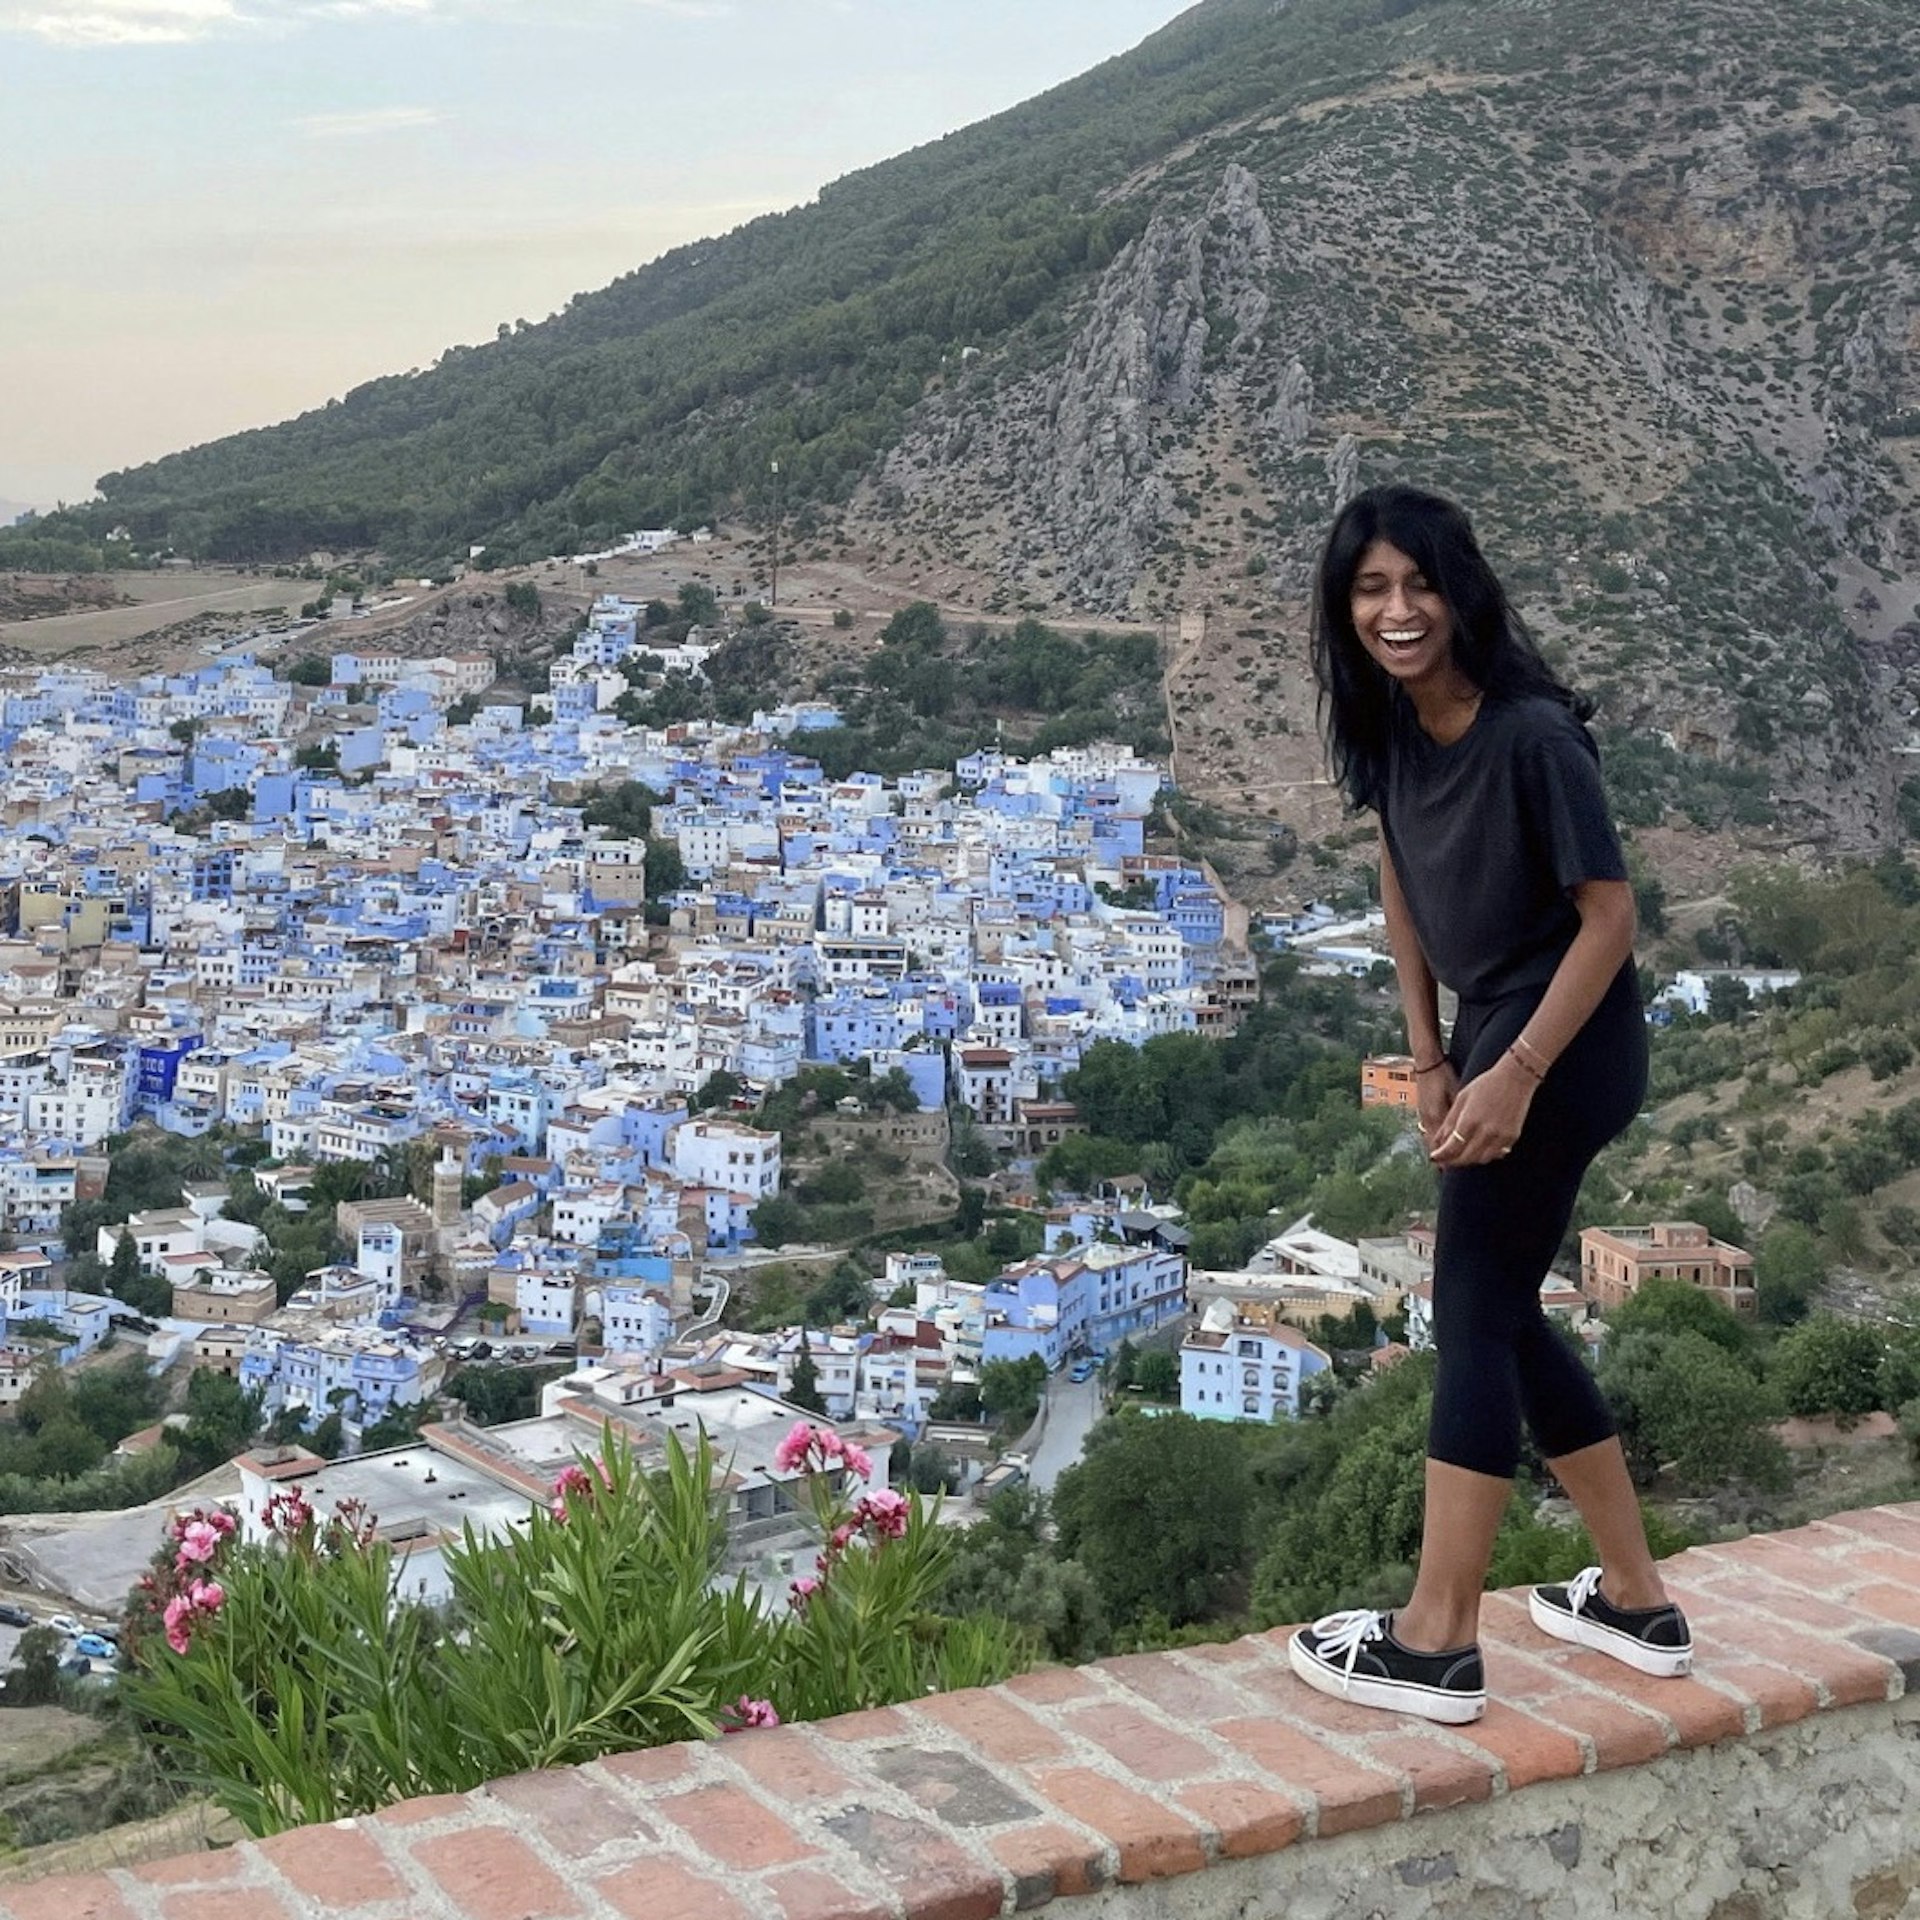 Deepa Lakshmin in Morocco, laughing and standing on a wall with the city of Chefchaouen in the background.